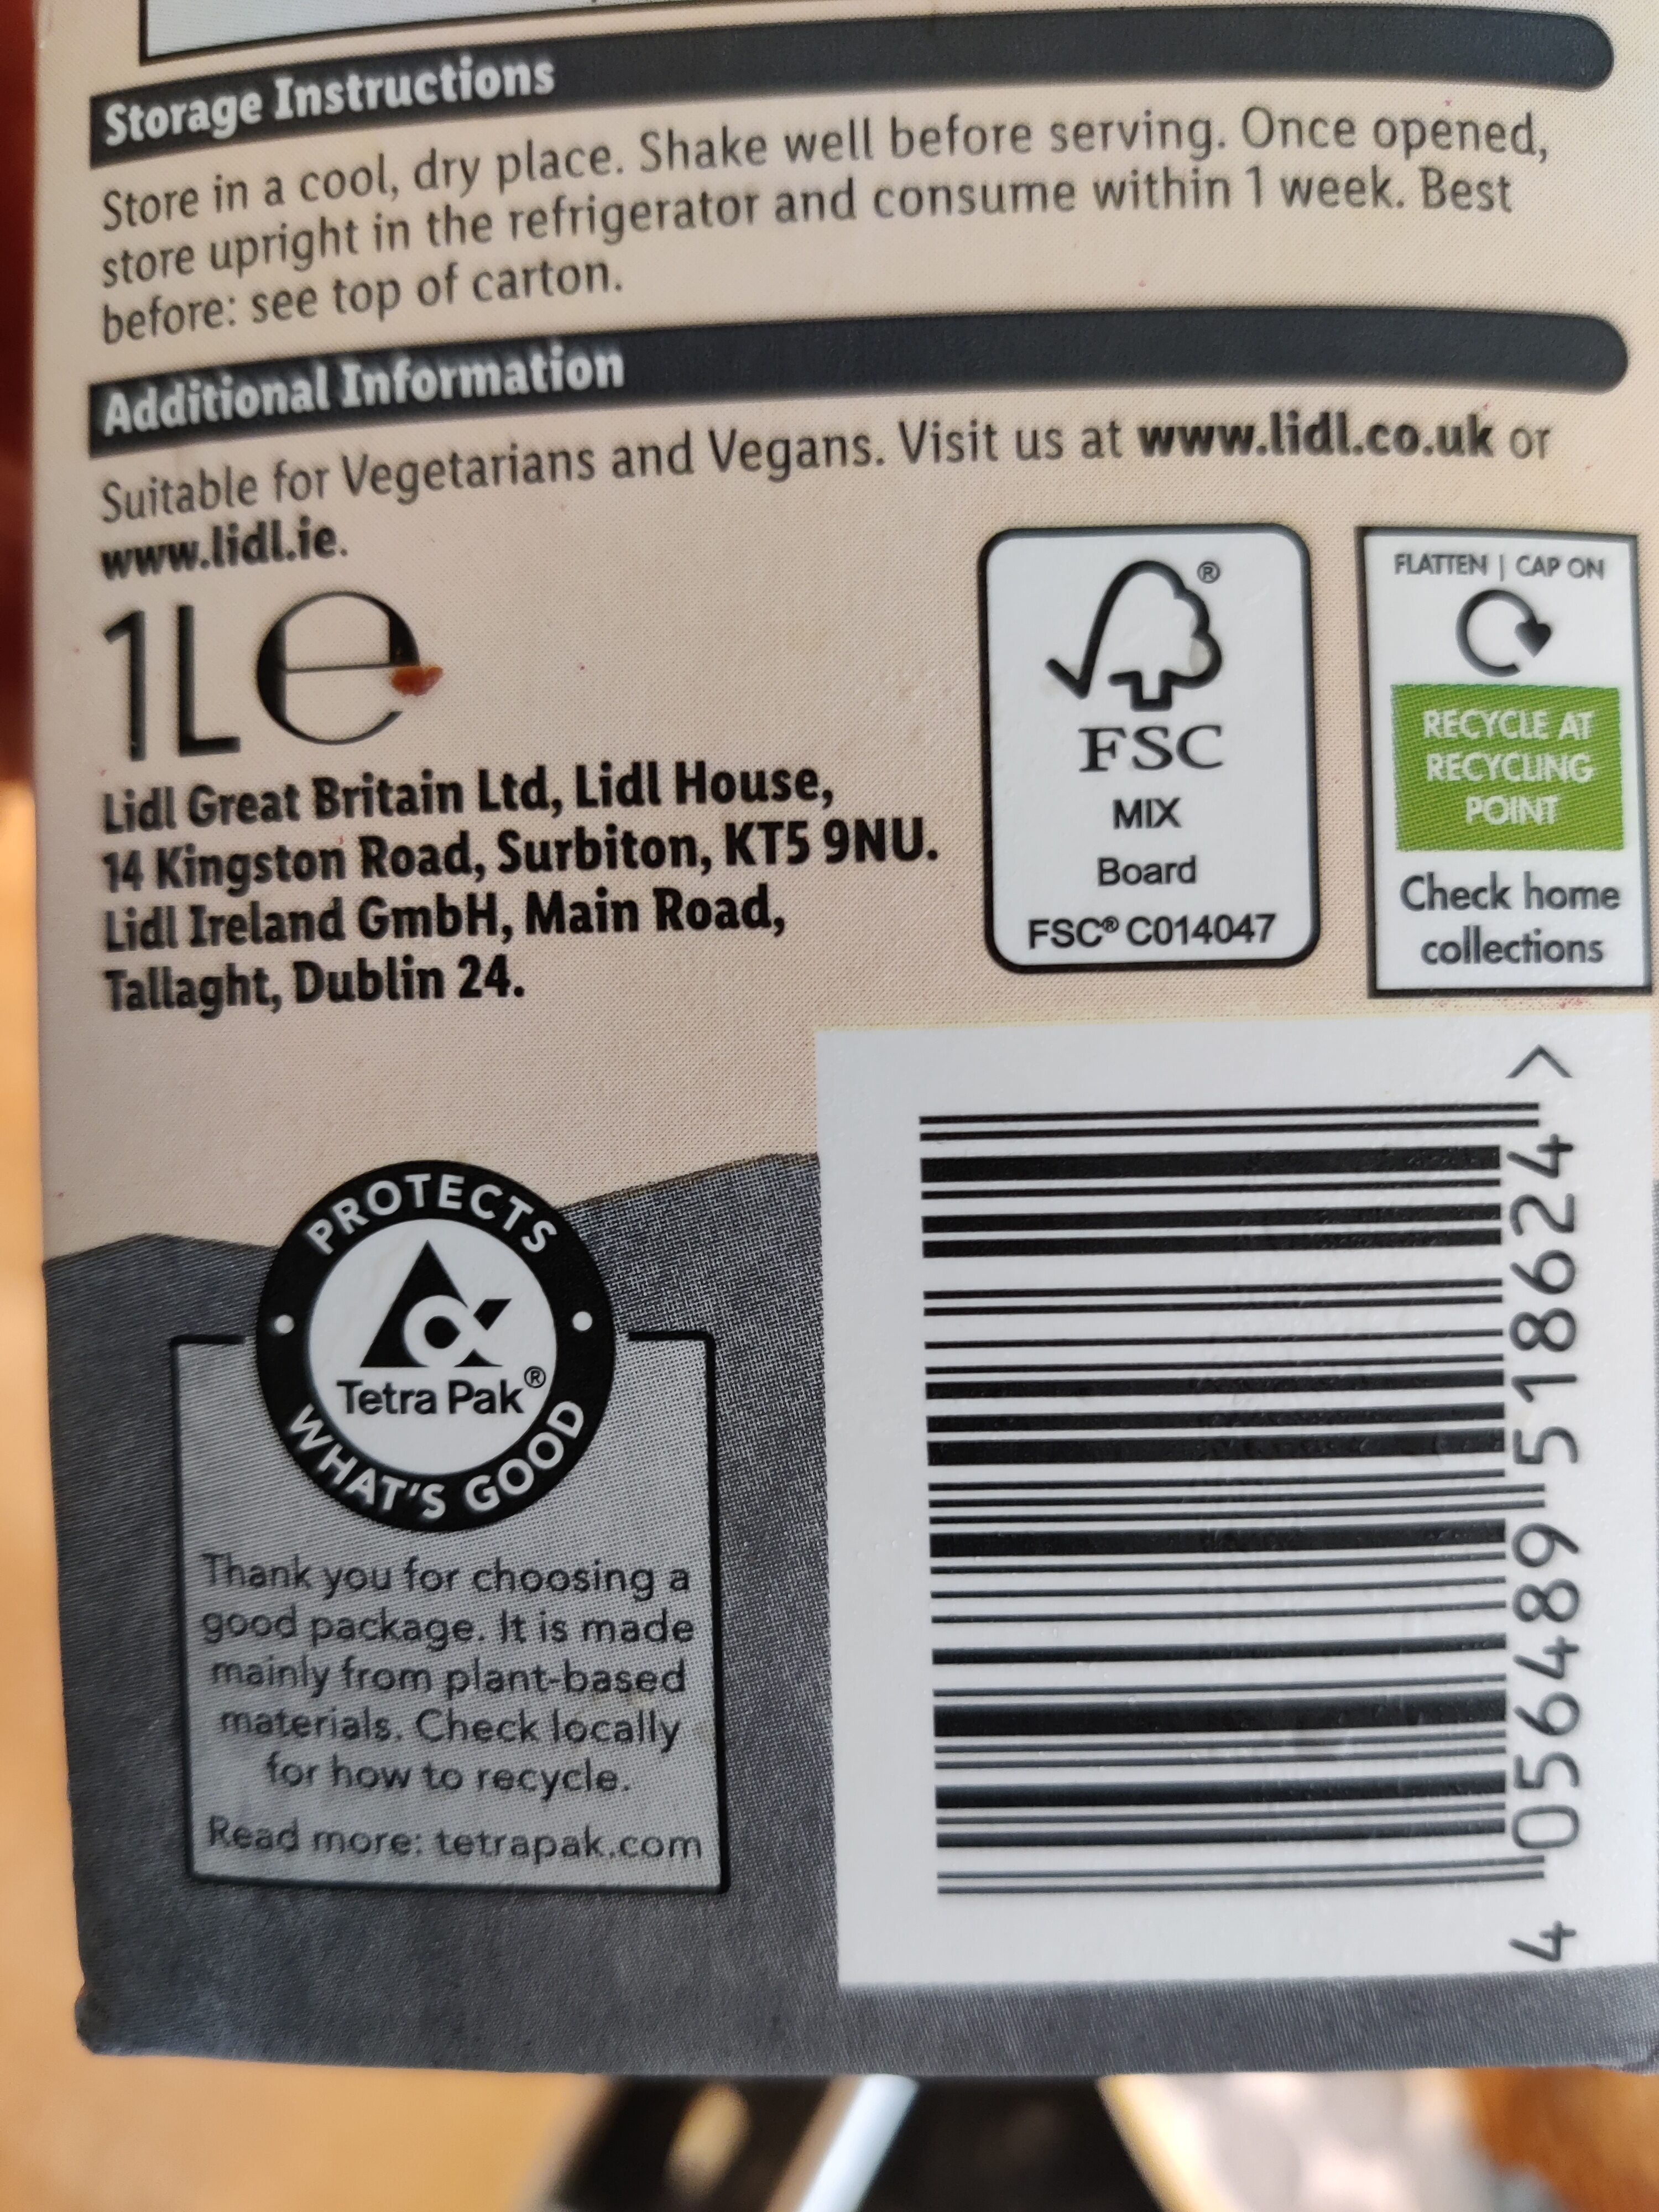 Barista Oat milk - Vemondo - Recycling instructions and/or packaging information